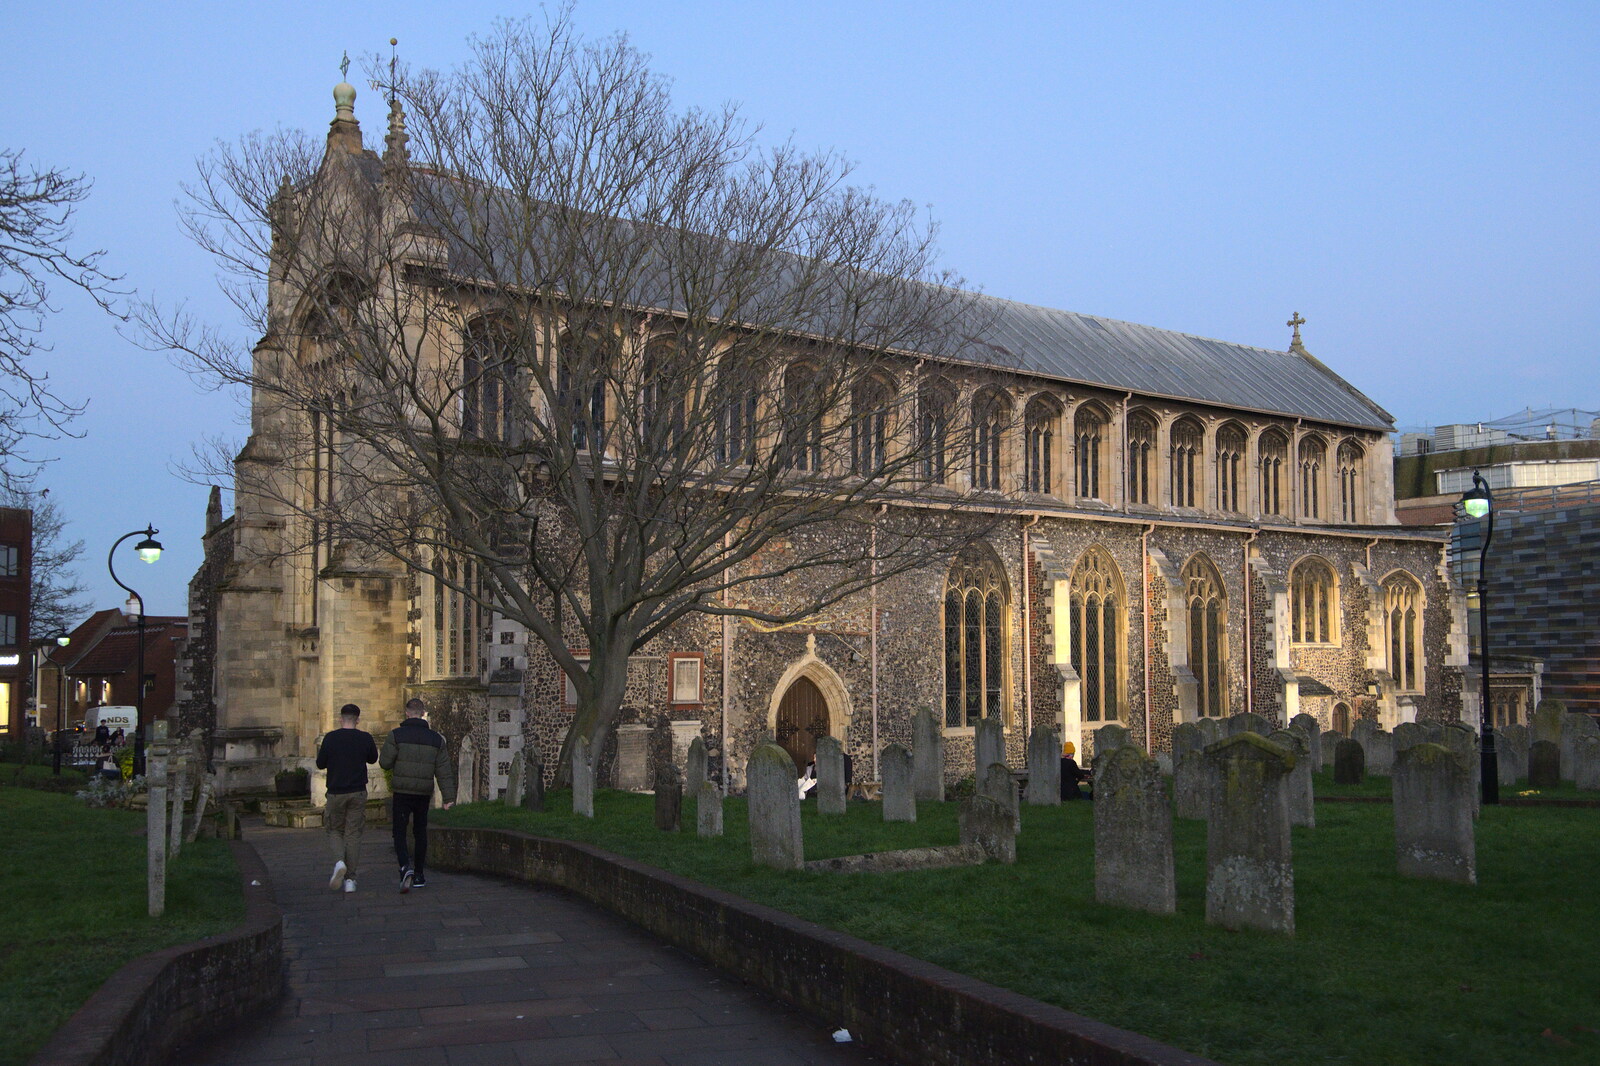 St. Stephen's church in the gathering dusk from Christmas Shopping in Norwich, Norfolk - 21st December 2022